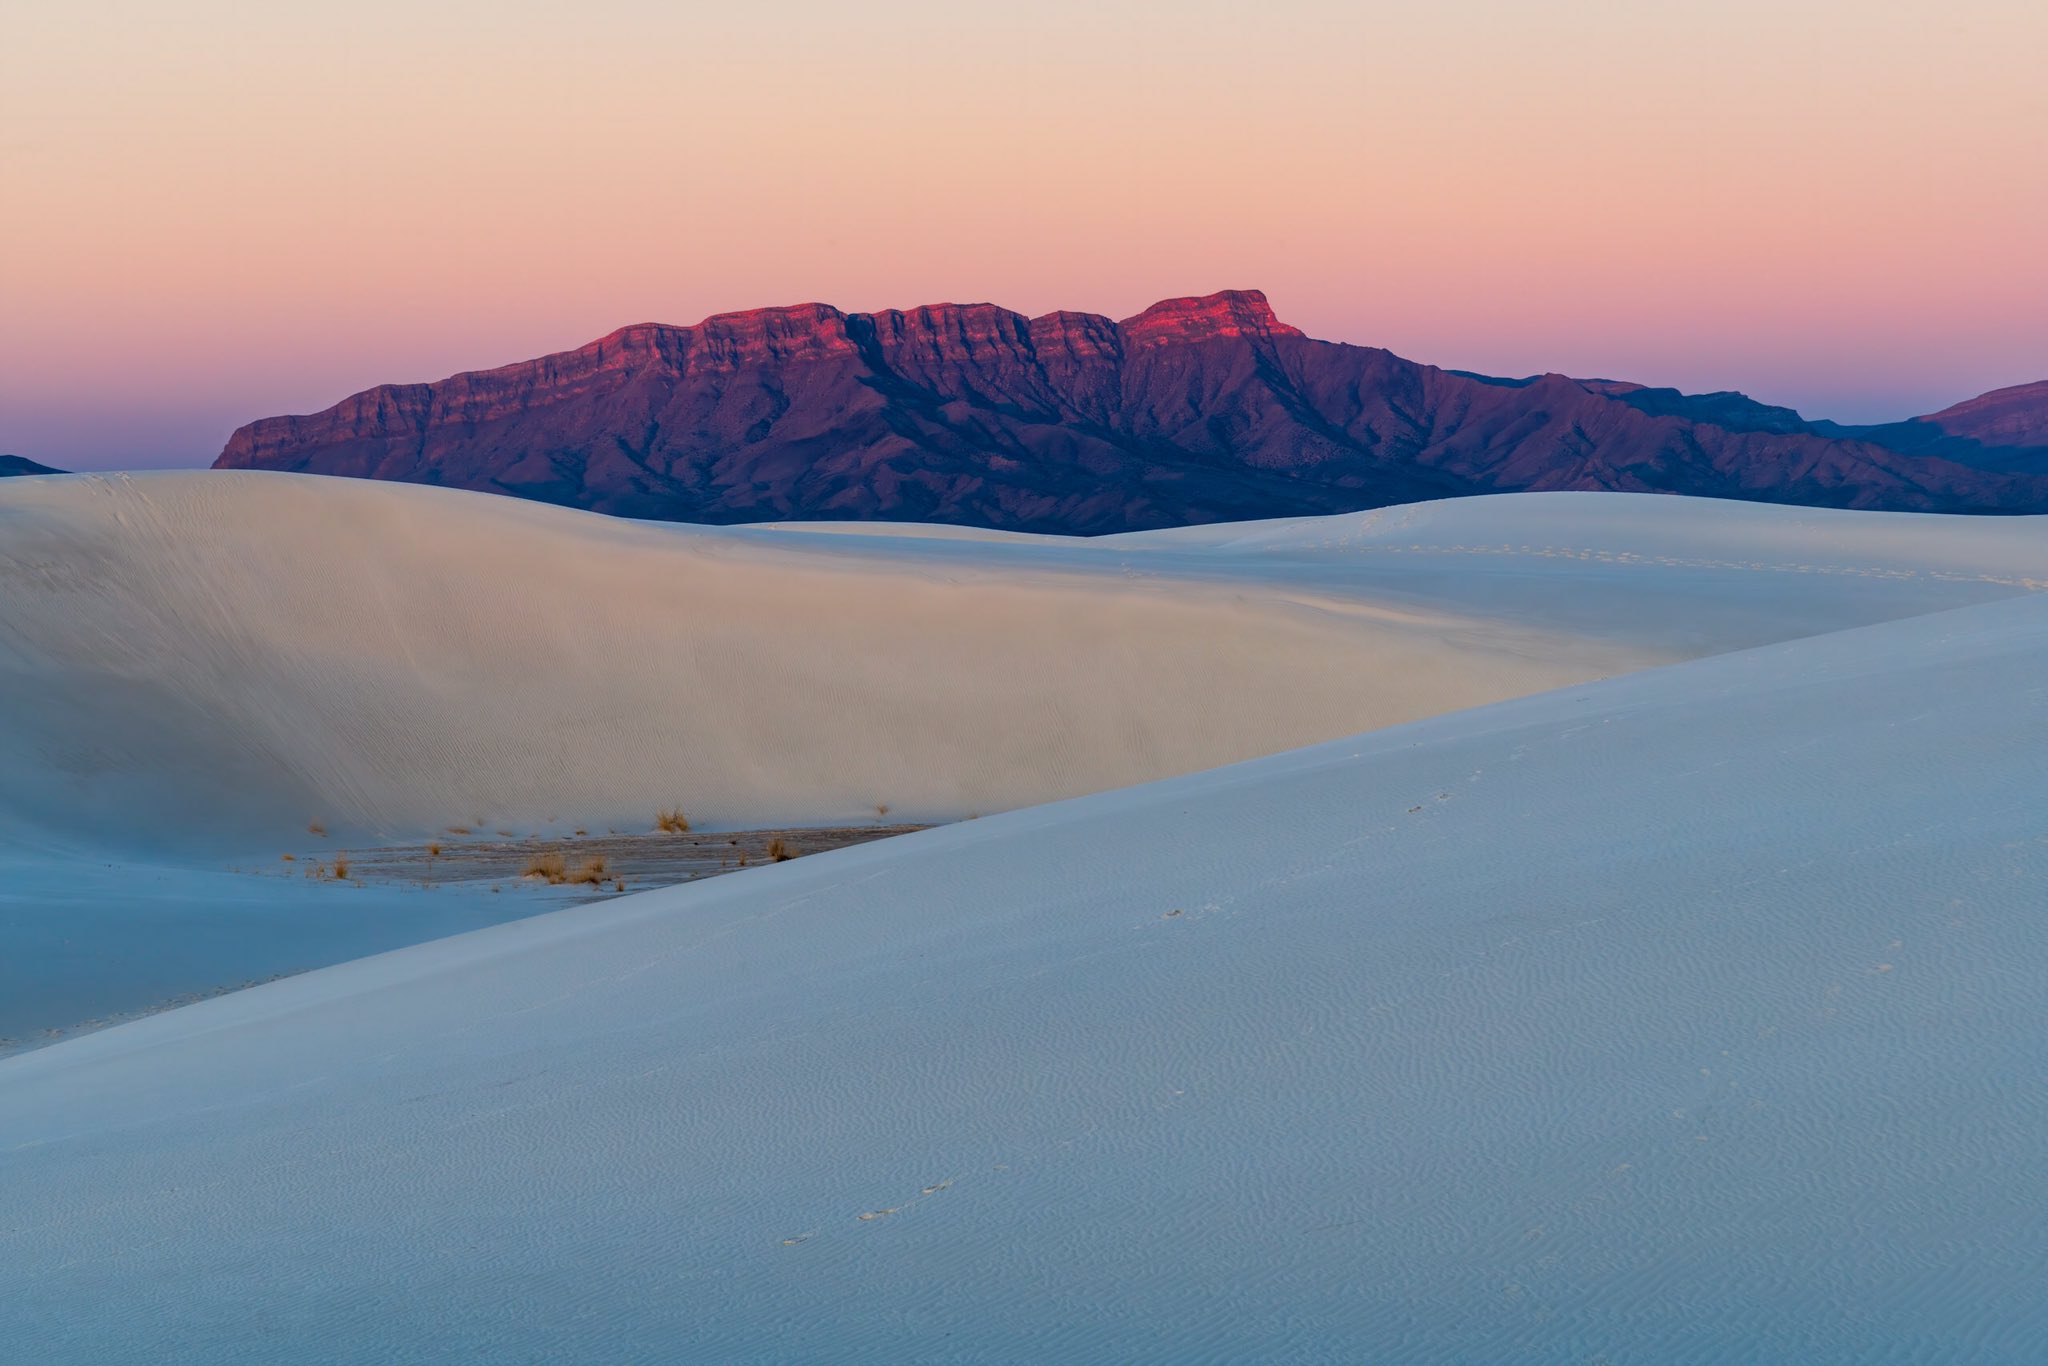 3rd Place A warm glow during sunrise at White Sands National Park, New Mexico by Michael Ryno Photo @mnryno34